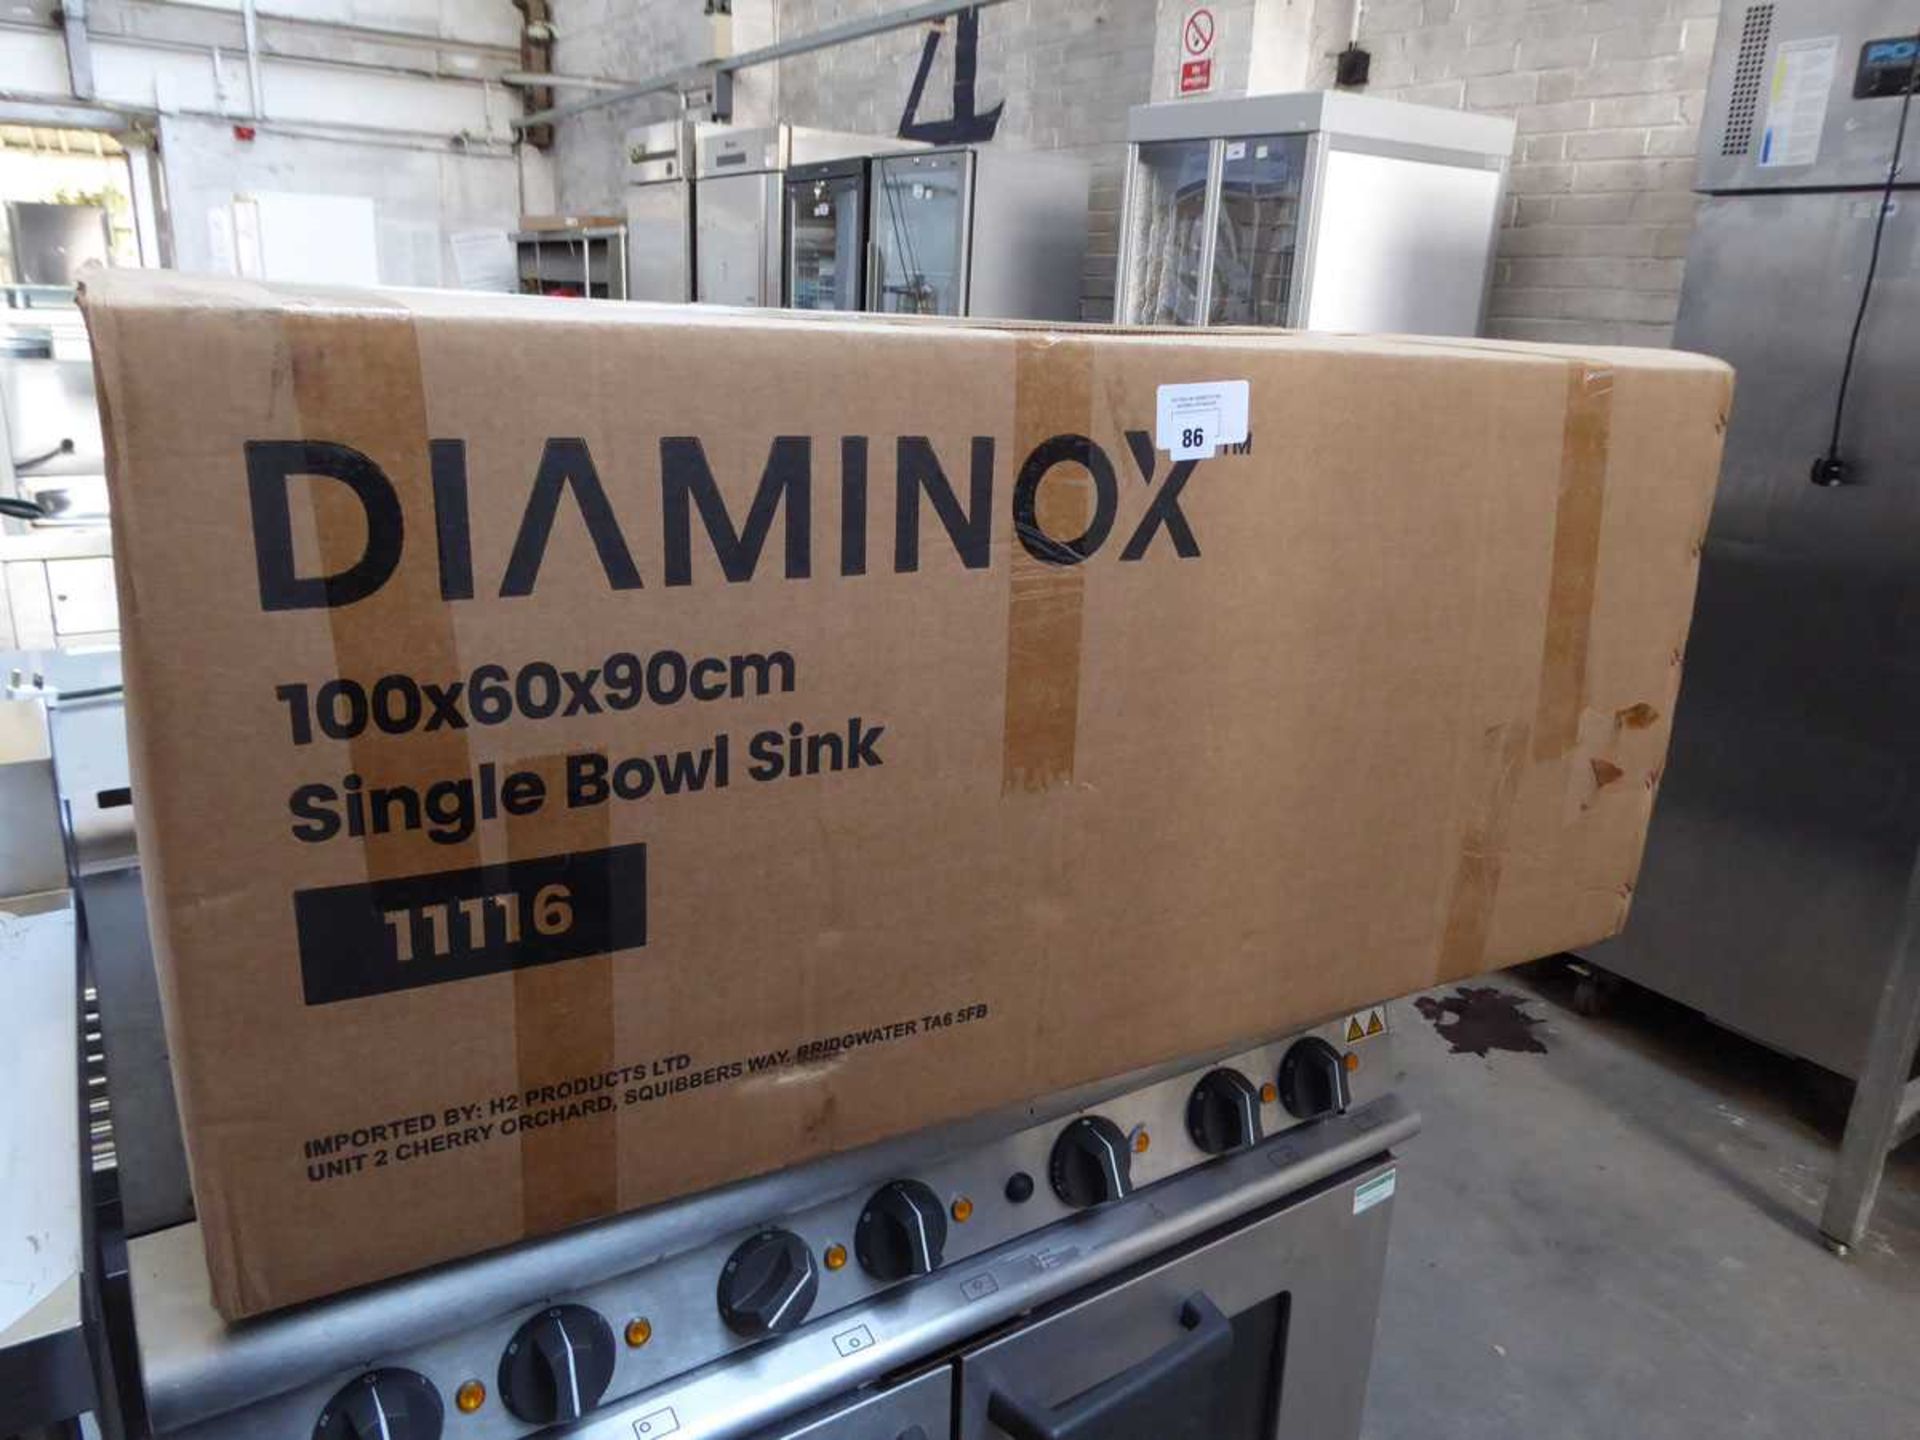 +VAT 100cm Diaminox single bowl sink unit with drainer (boxed) - Image 2 of 2